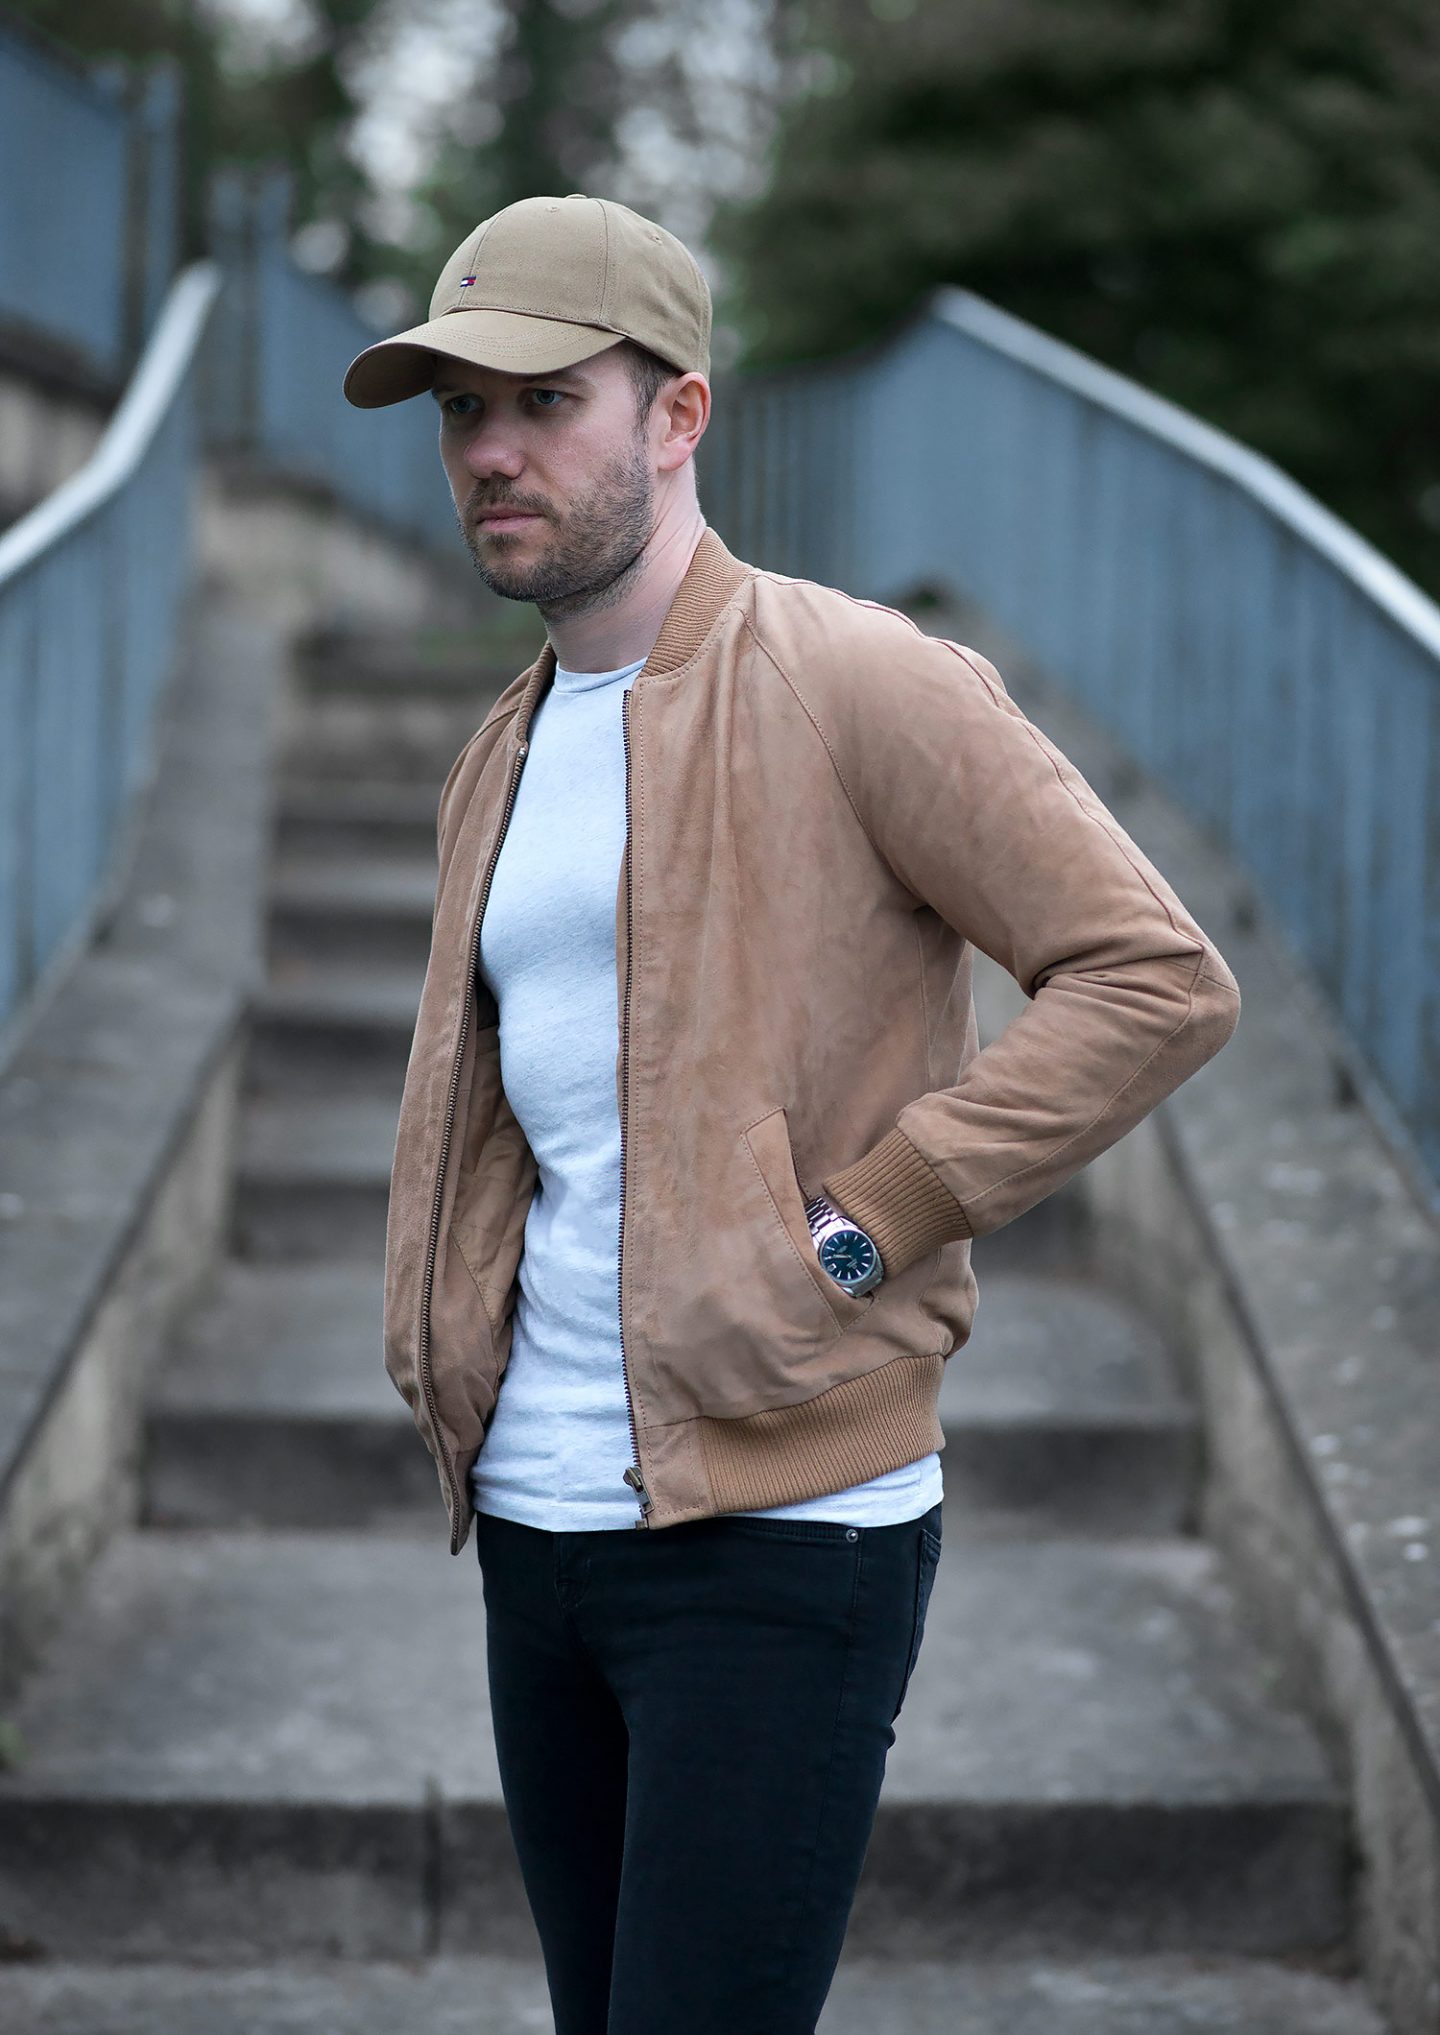 Tan Bomber Jacket Outfit Featuring A Special Guest - Your Average Guy